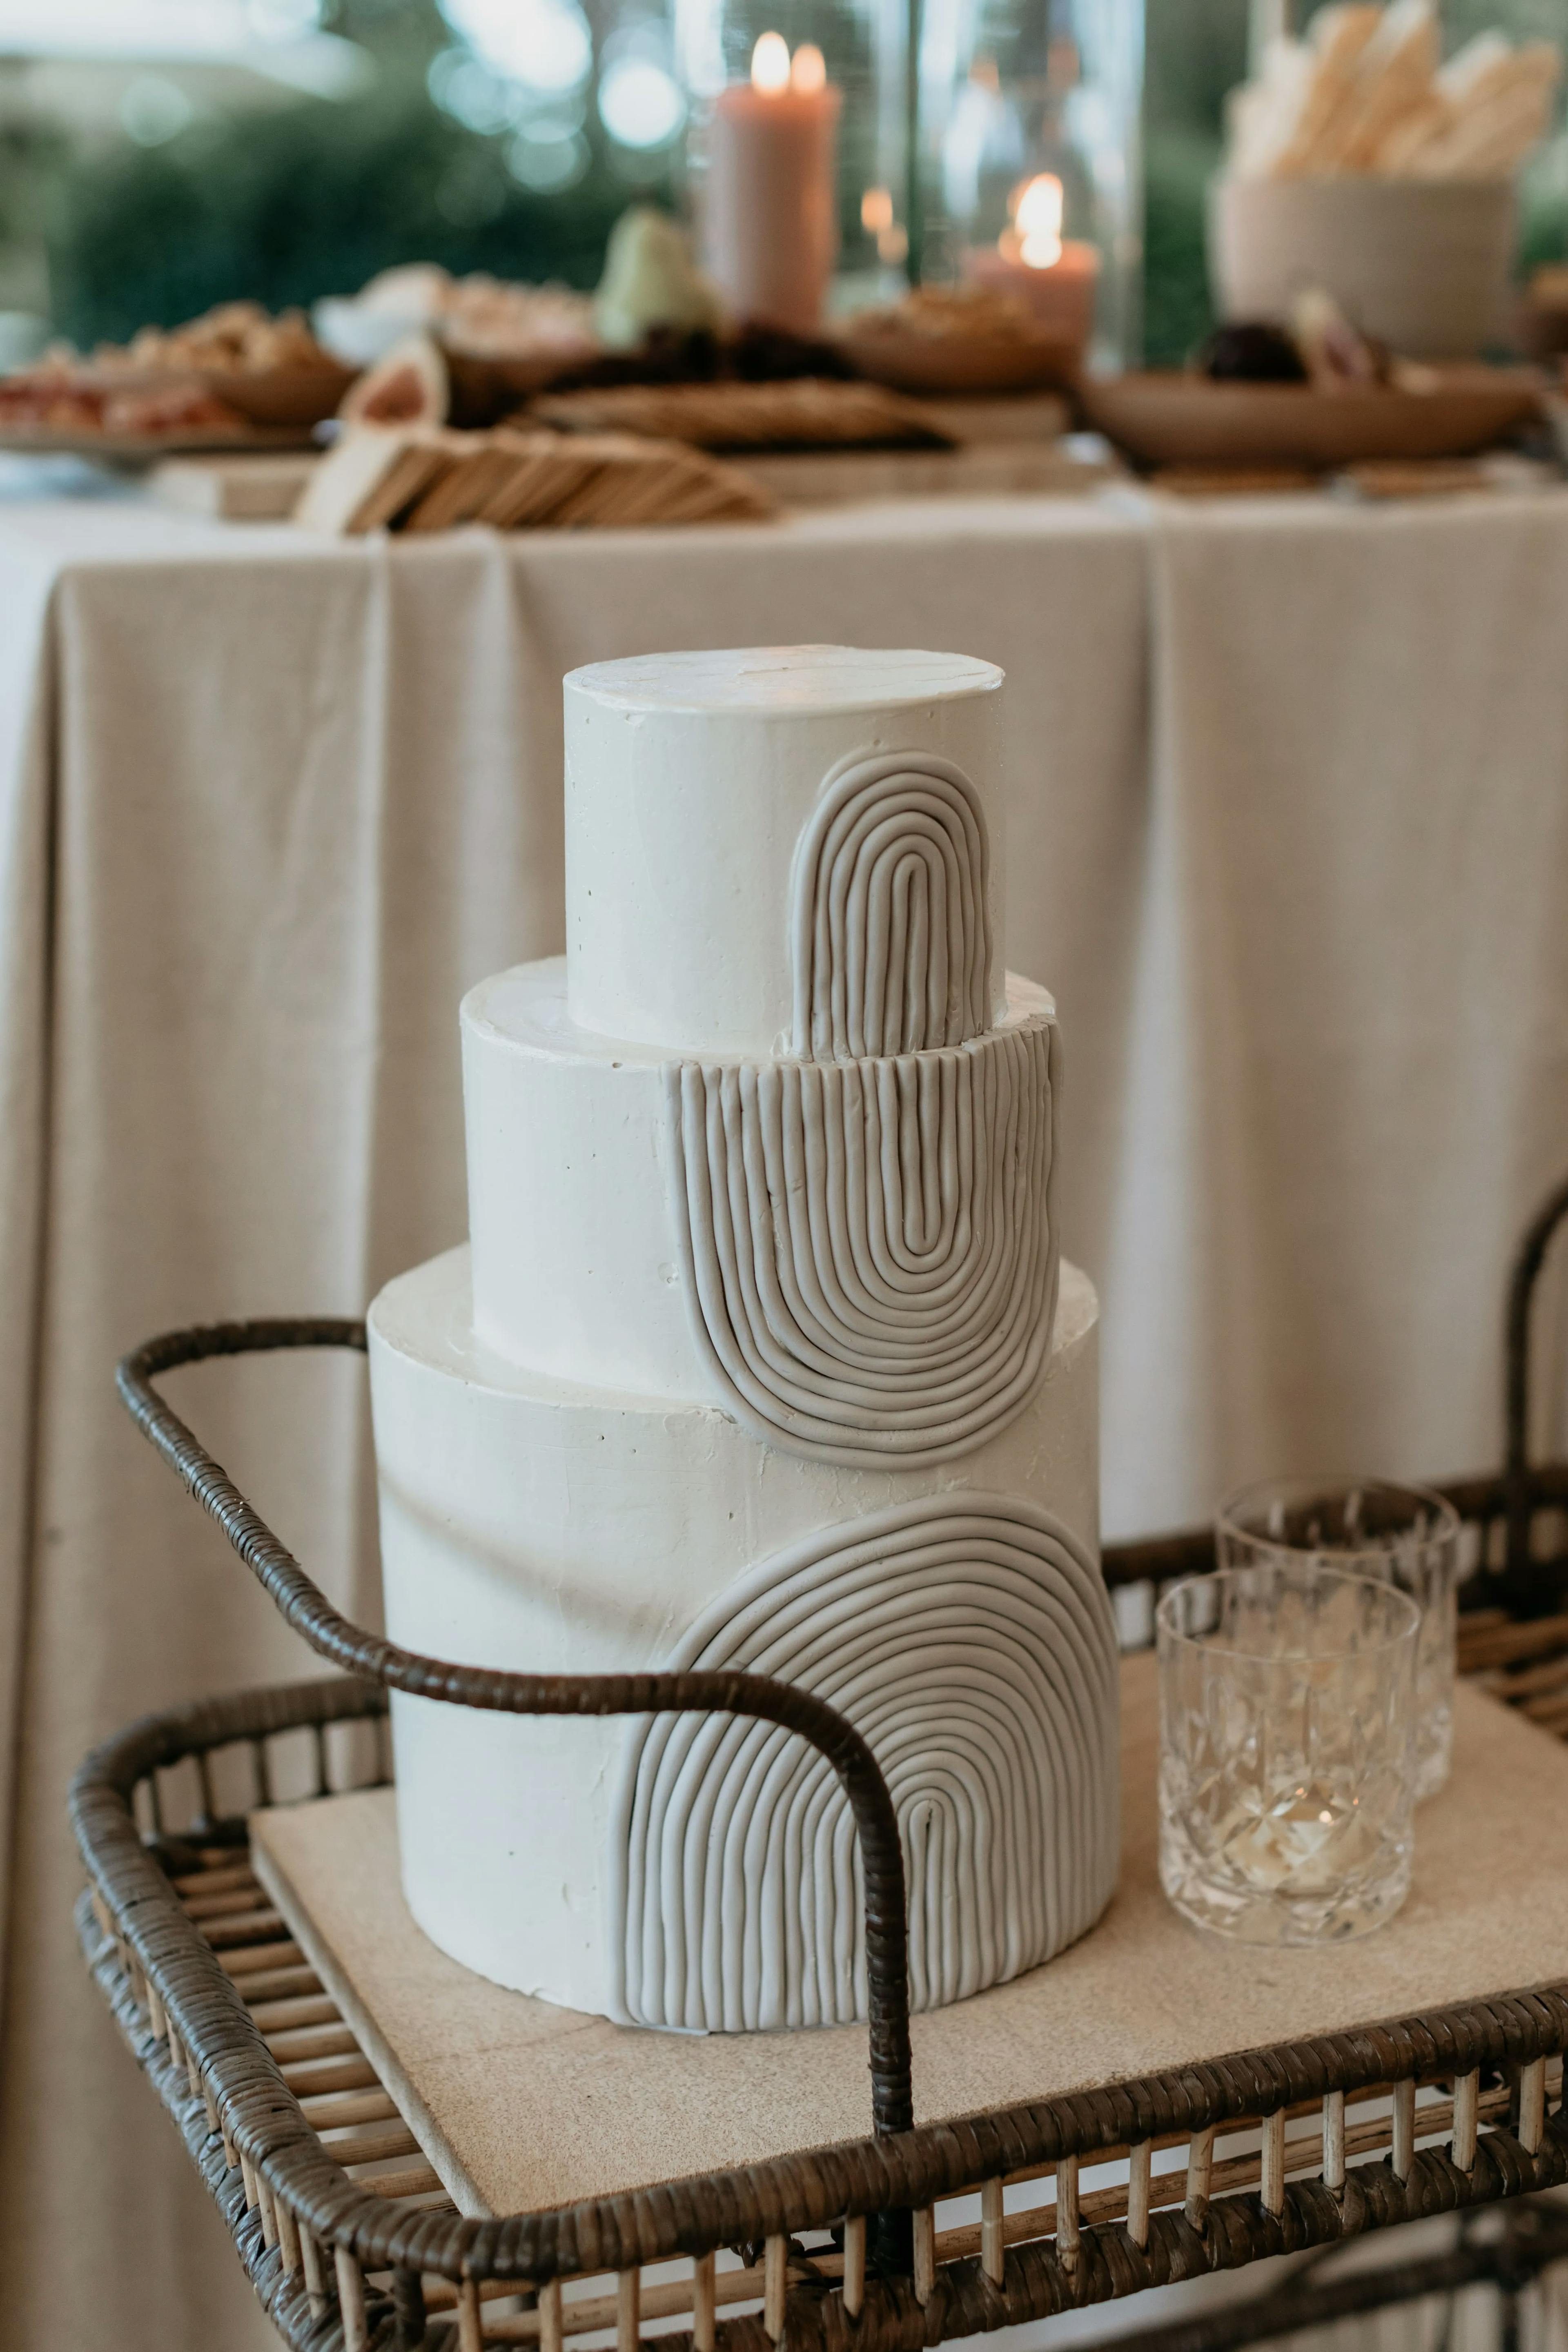 A three-tier white wedding cake with abstract textured icing designs sits on a wicker cart. Two empty glasses are placed next to the cake. In the blurred background, a table with candles and other food items is visible.